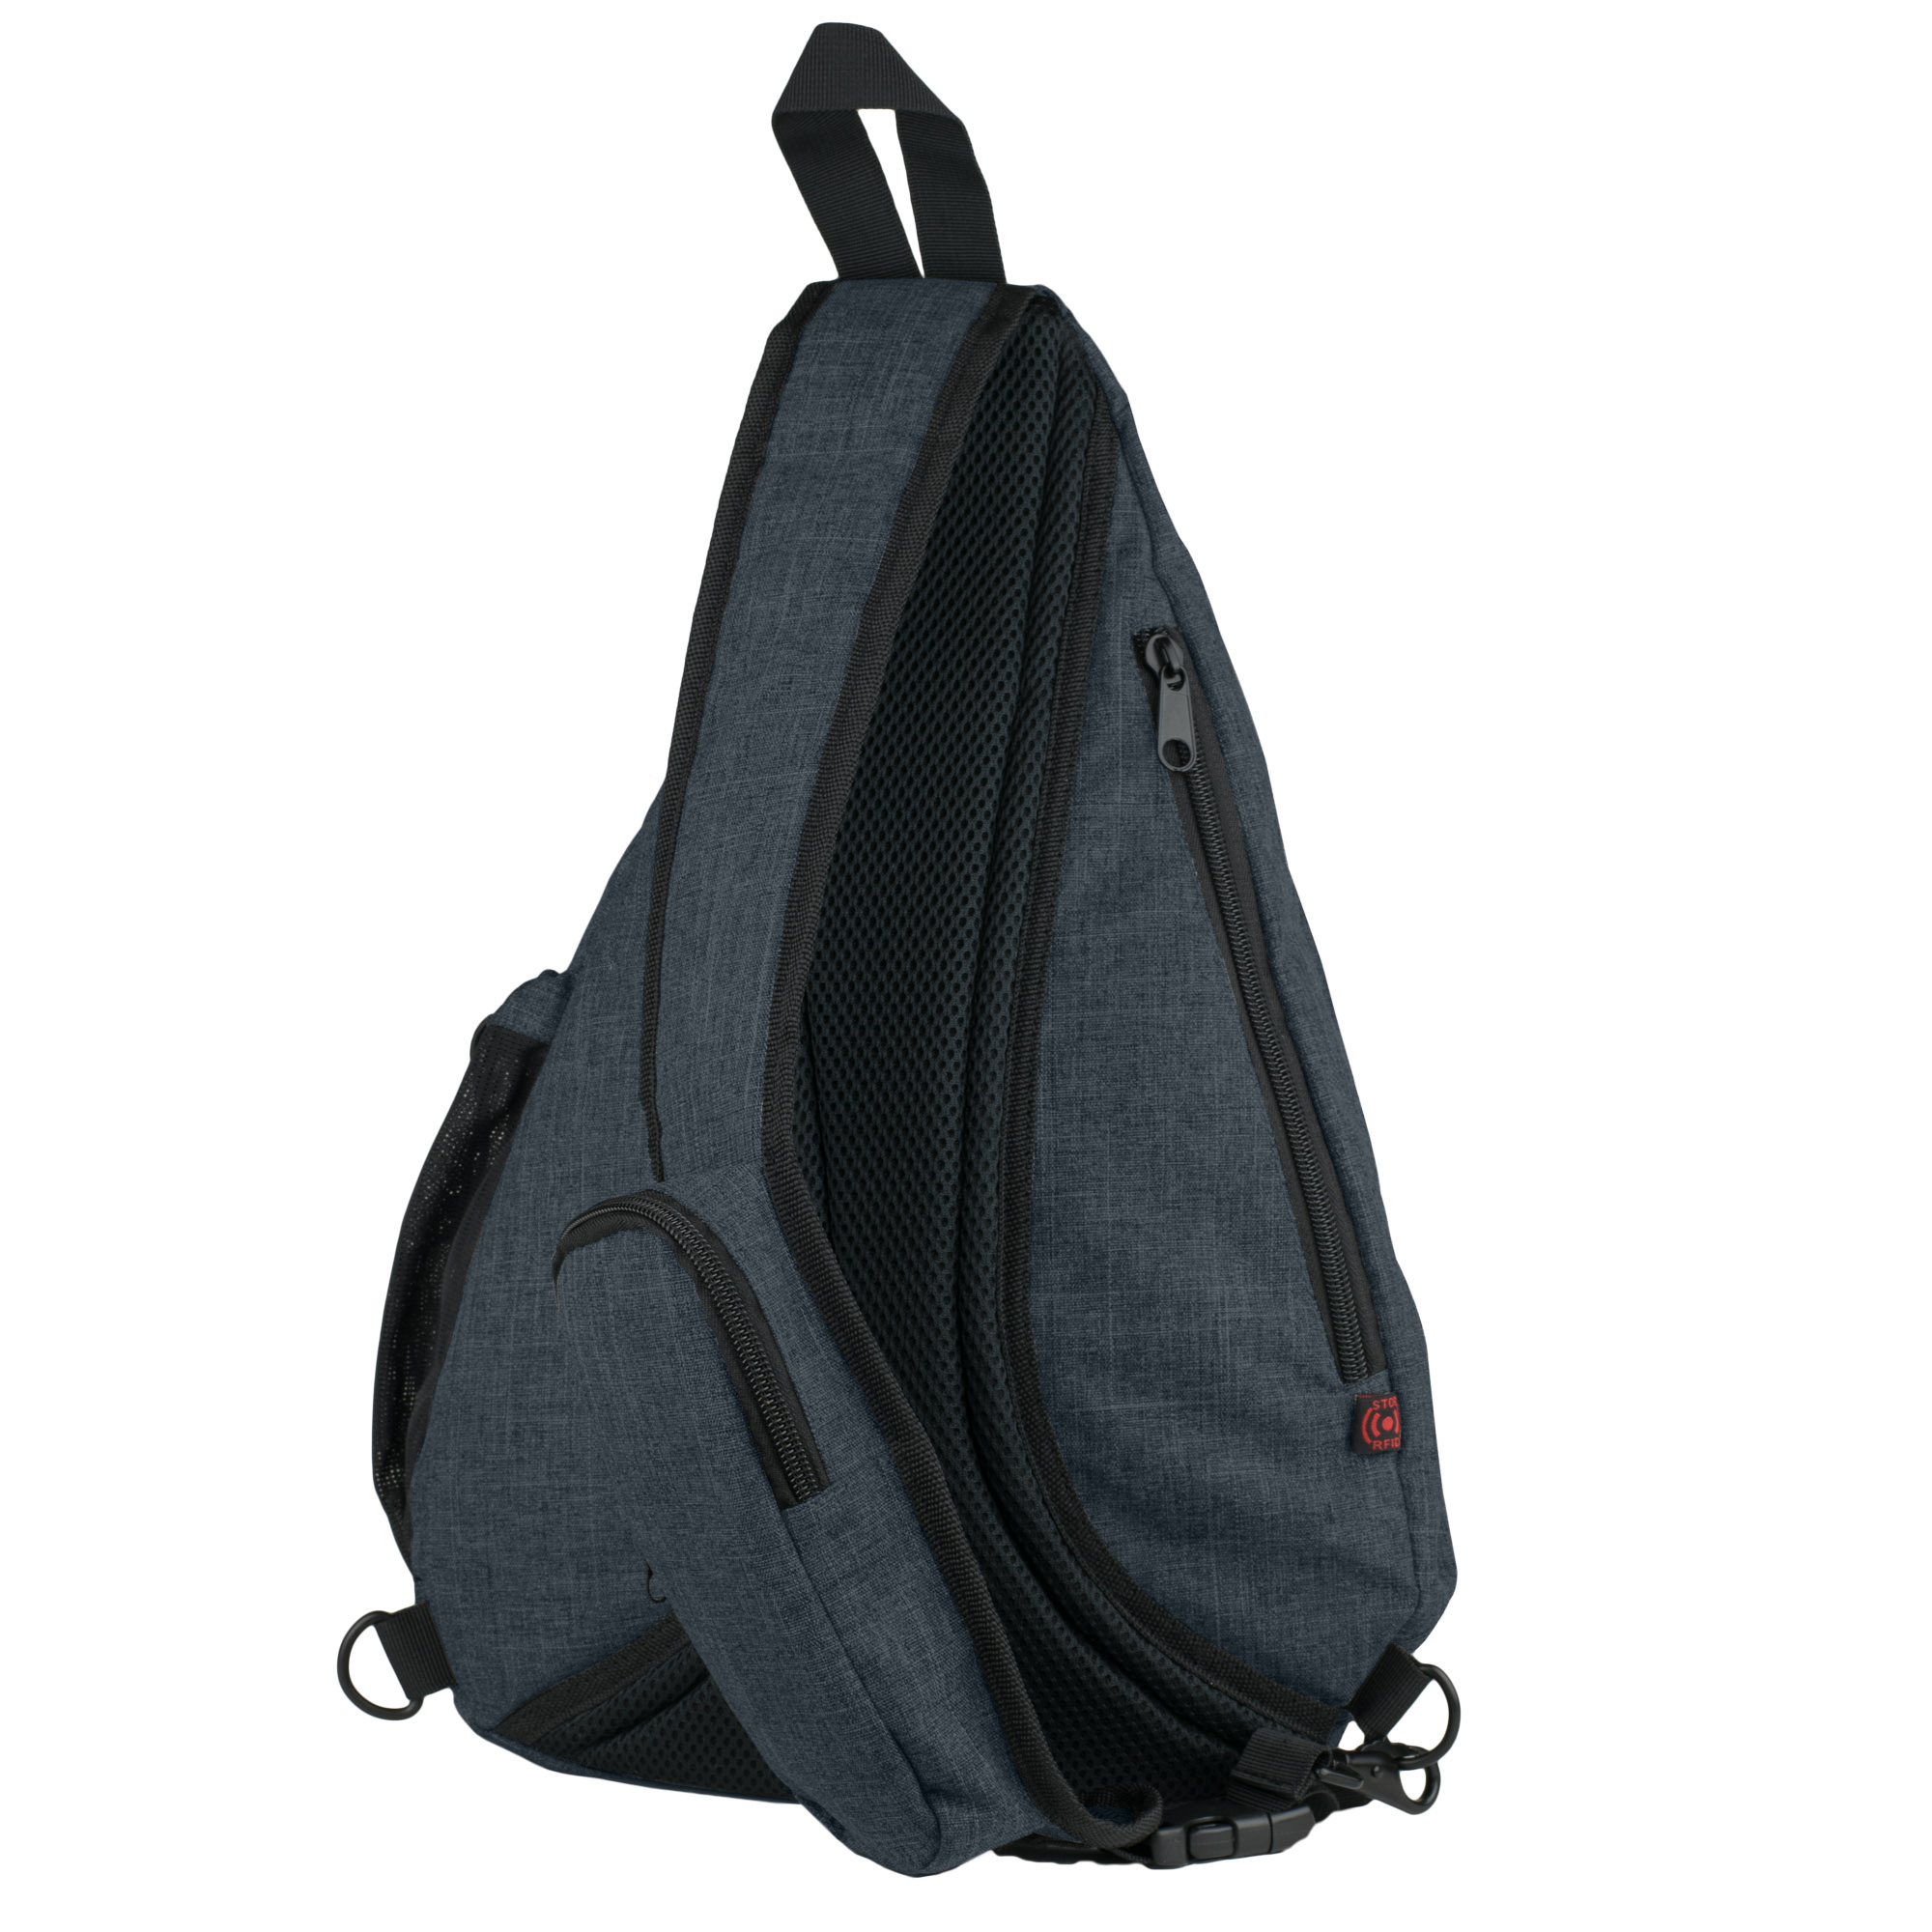 Versatile Canvas Sling Bag Backpack with RFID Security Pocket and Multi Compartments - Black - image 5 of 9